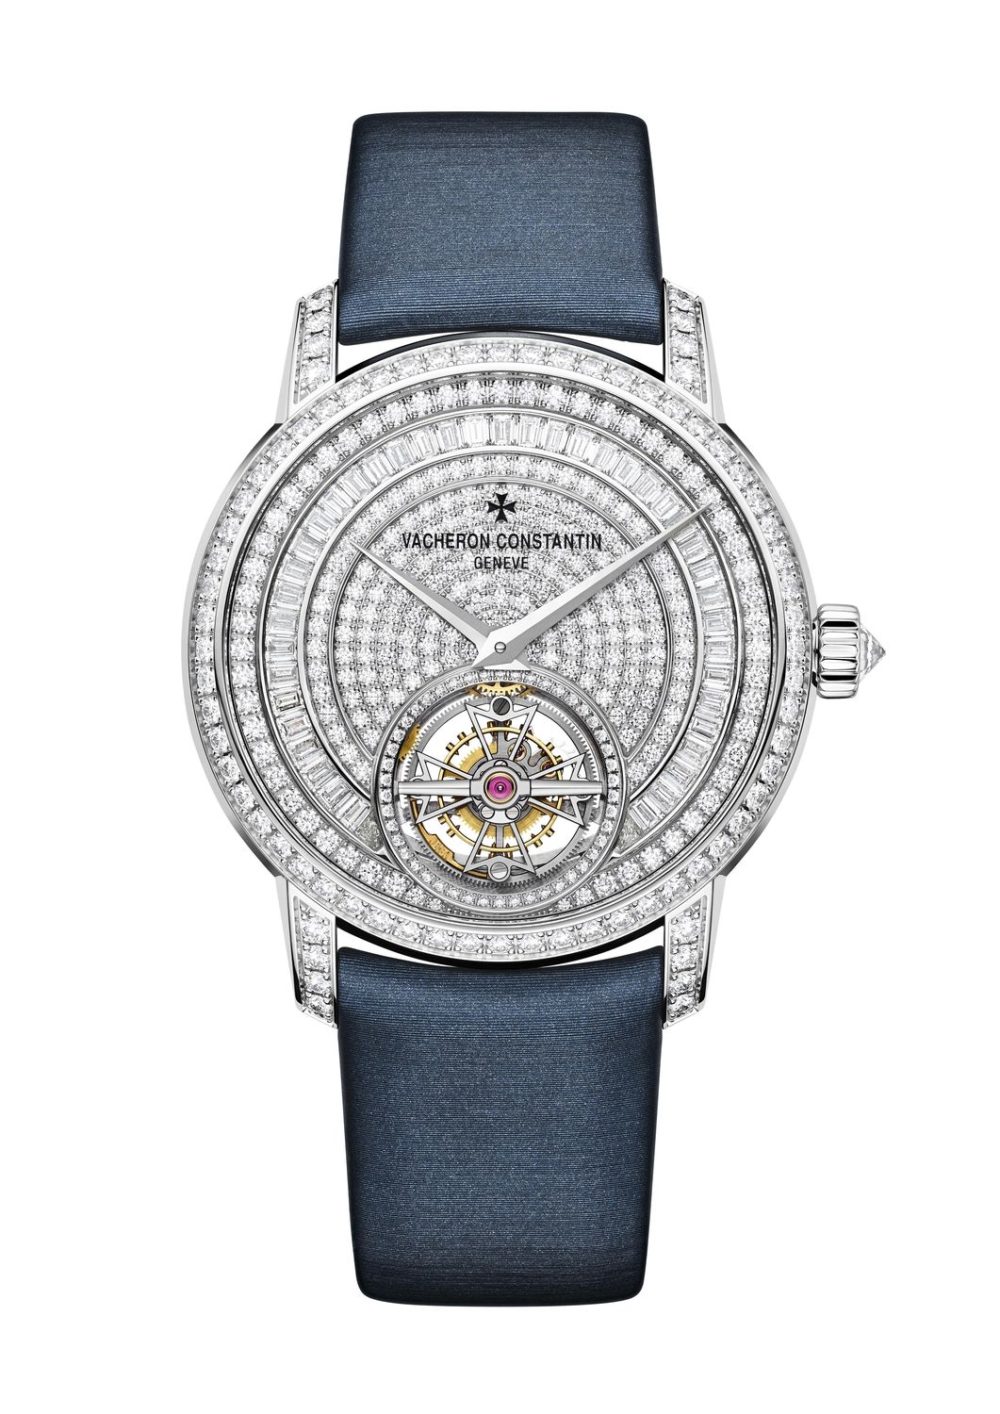 Vacheron Constantin Traditionnelle tourbillon, gravity defied in a subtle and sophisticated way